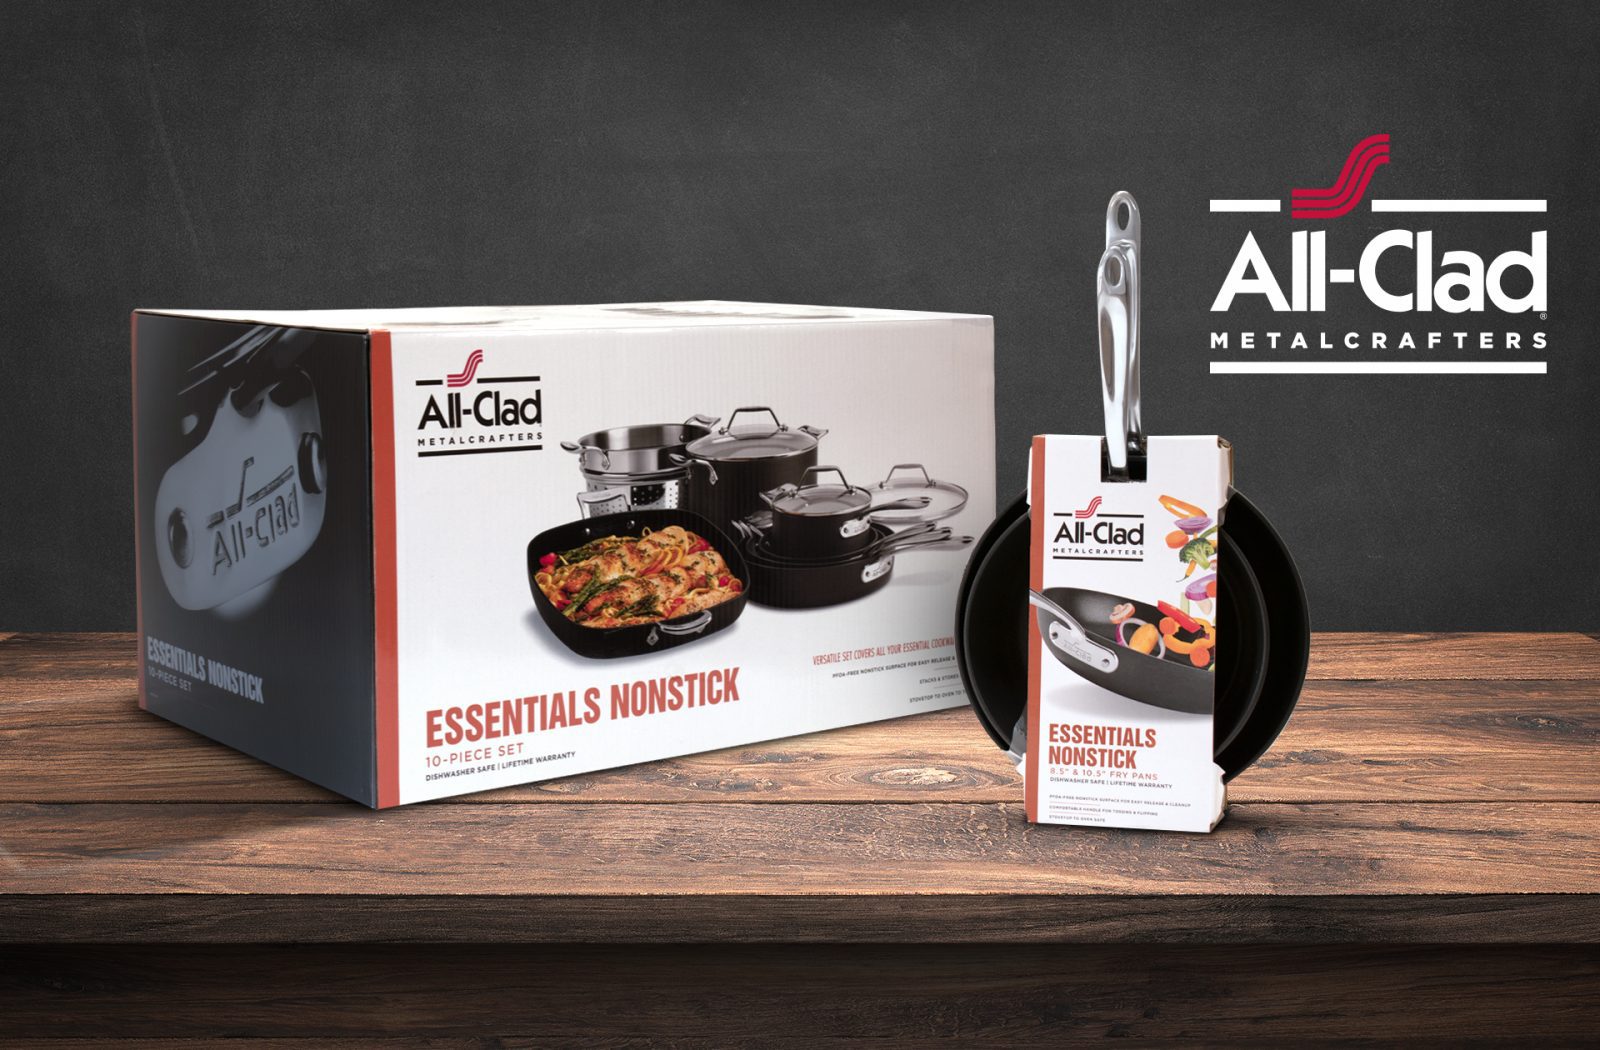 Product photography of All-clad metalcrafters essential nonstick cookware, featuring packs created by a cpg packaging design agency.